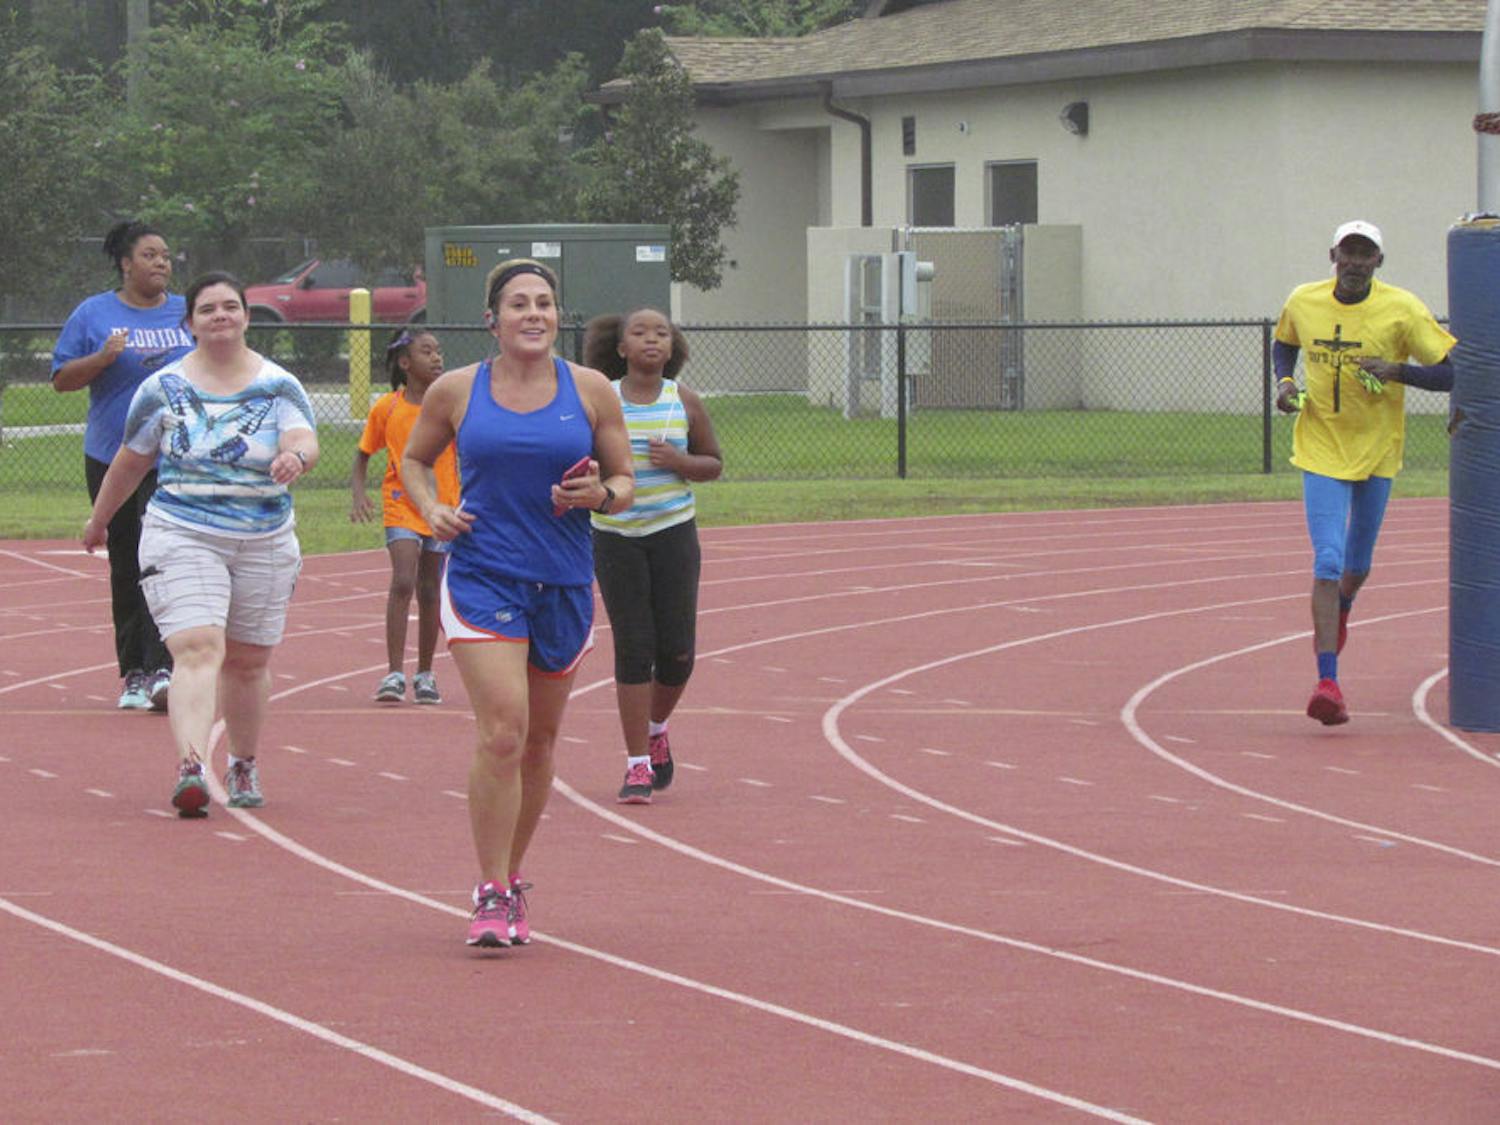 Kourtney Oliver (center), the program coordinator for the Healthiest Weight Florida initiative in Alachua County, runs in the inaugural World Heart Day 5K event at Fred Cone Park on Sept. 26, 2015. Forty-seven people registered to run to raise awareness for heart disease and stroke prevention.